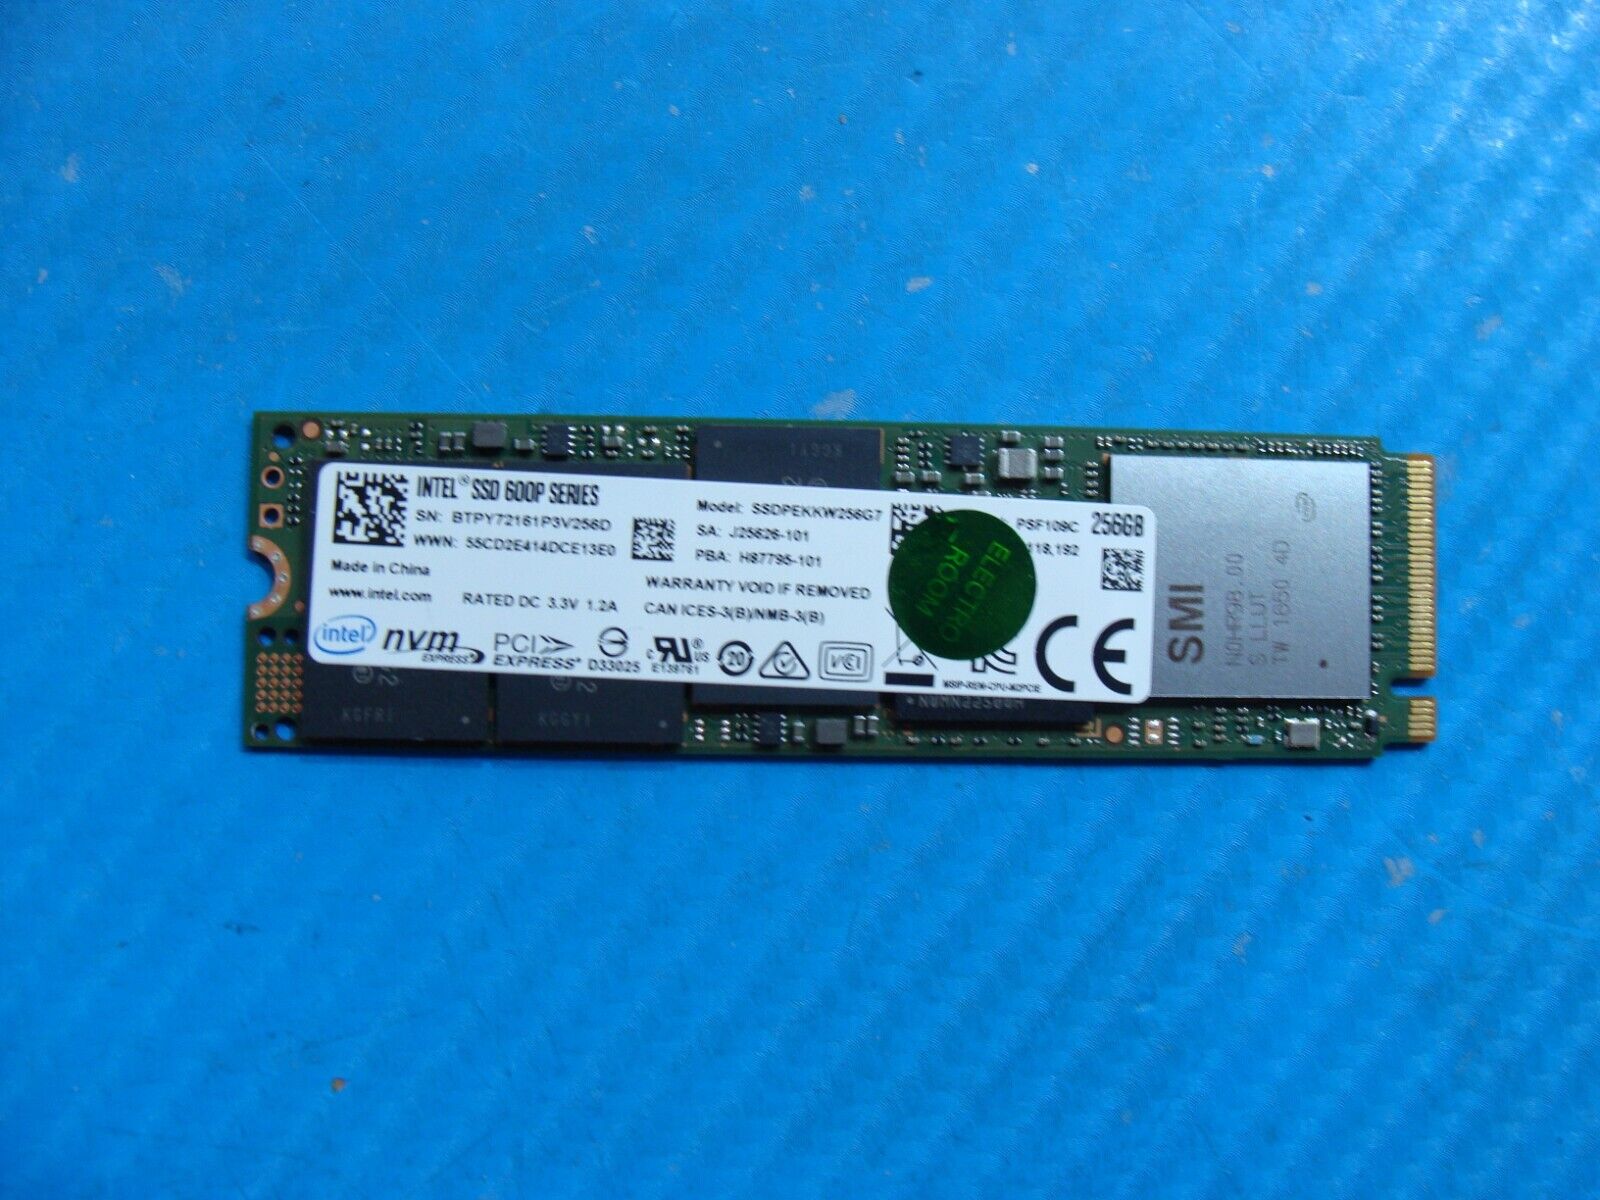 Acer PH315-51-78NP Intel 256GB M.2 NVMe SSD Solid State Drive SSDPEKKW256G7